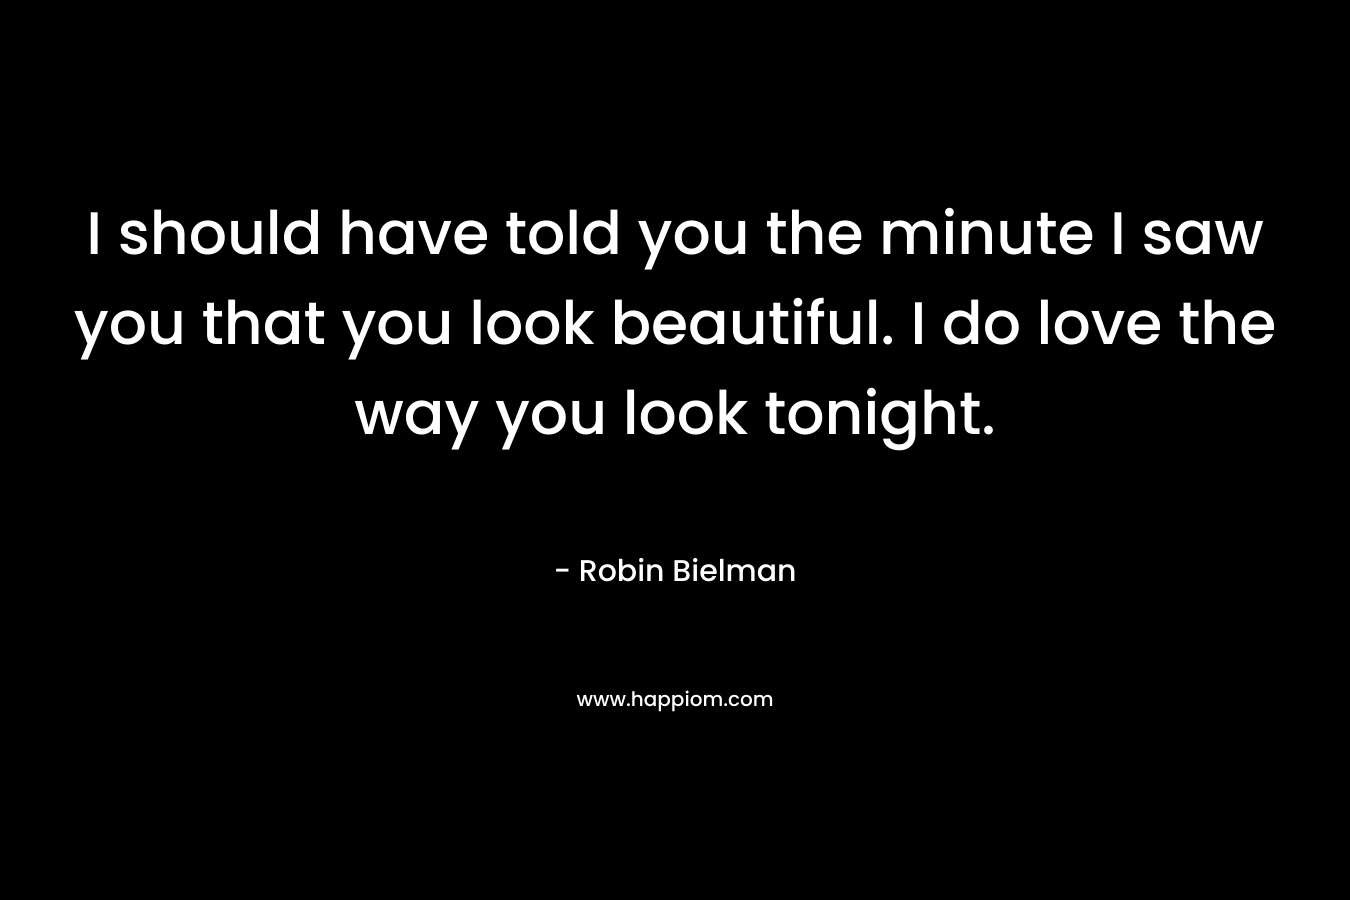 I should have told you the minute I saw you that you look beautiful. I do love the way you look tonight.